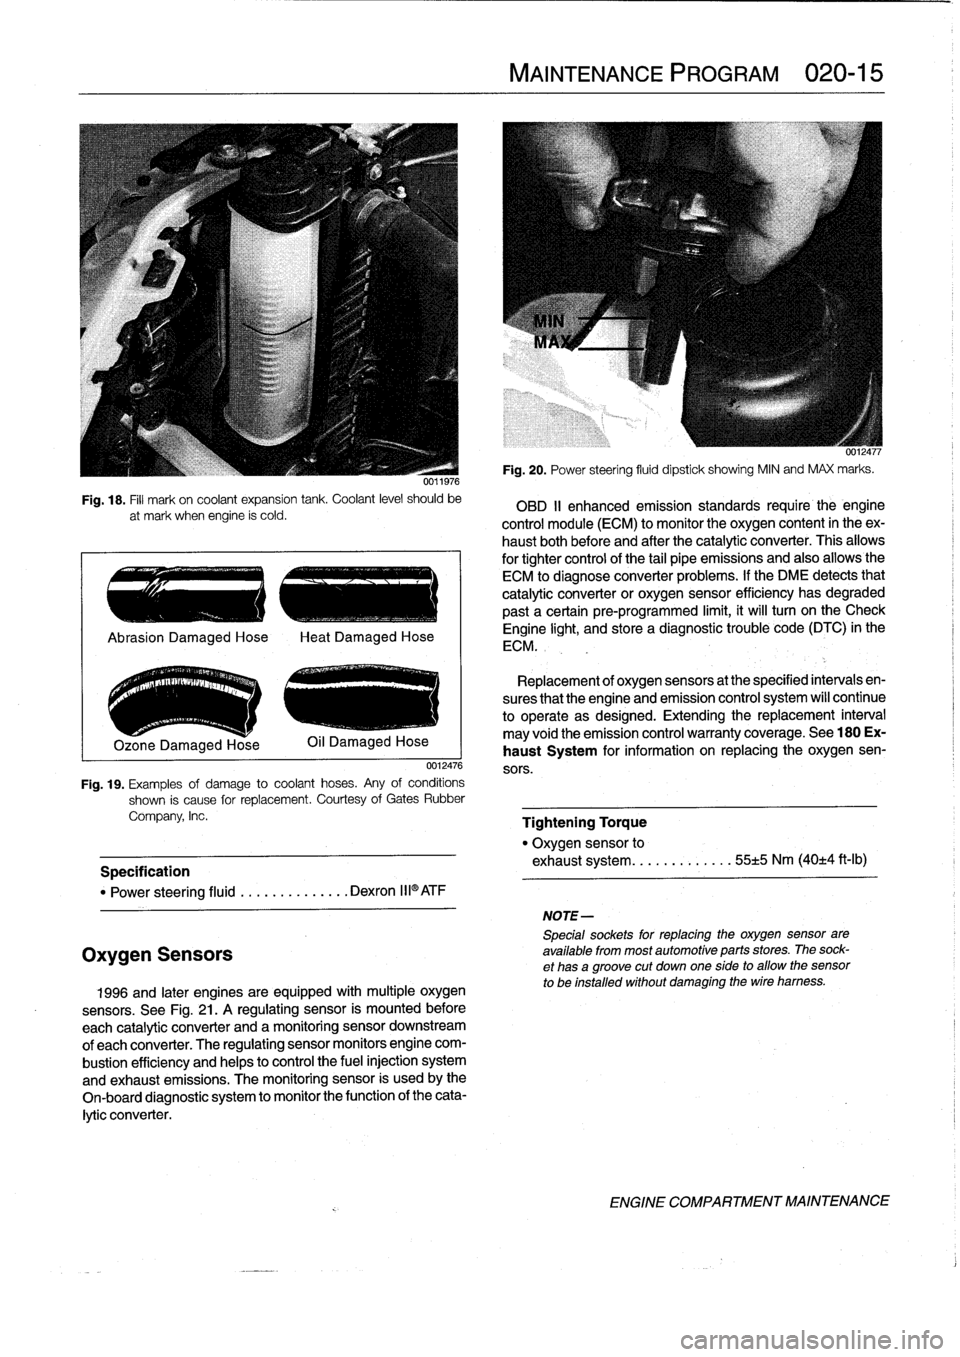 BMW 318i 1997 E36 Owners Manual 
Fig
.
18
.
Fill
mark
on
coolant
expansion
tank
.
Coolant
level
should
be

at
mark
when
engine
ís
cold
.

.
..
e
..
.-
..

	

~
..
.-
.

Ozone
Damaged
Hose

0012476

Fig
.
19
.
Examples
of
damage
to
